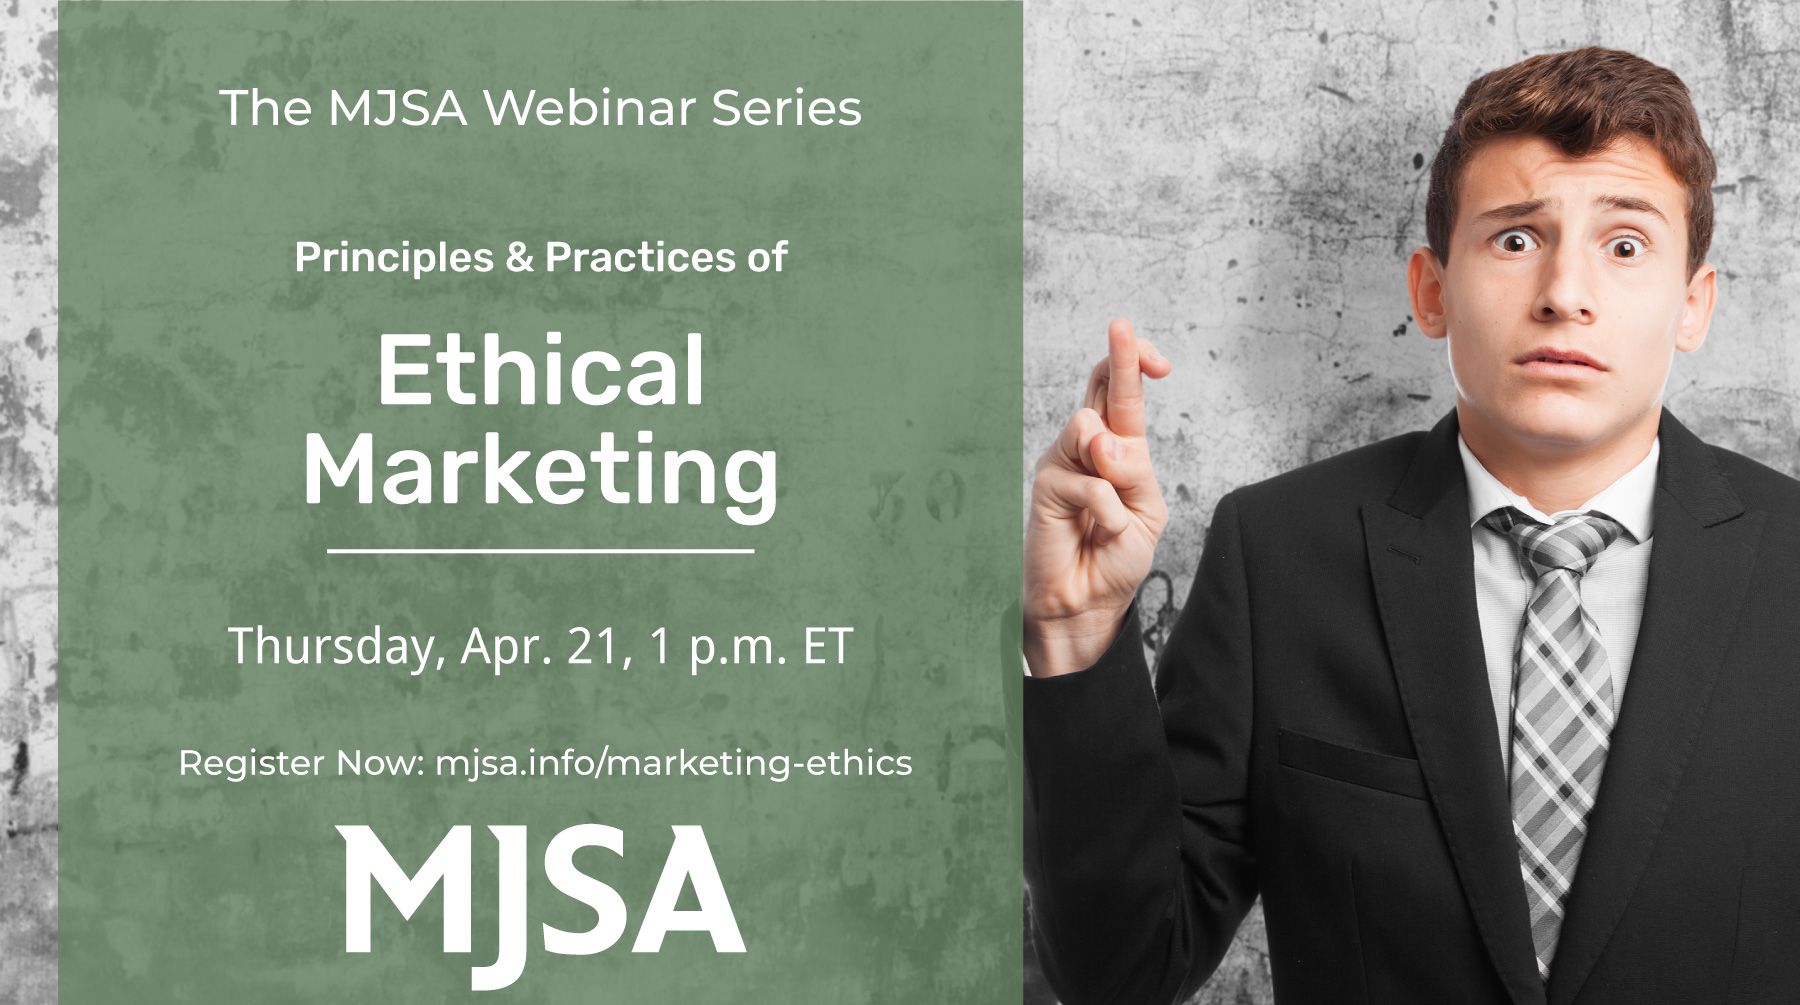 Image of man wearing a suit and looking vey worried while crossing his finger. Image has a banner promoting the Ethical Marketing webinar on April 21.